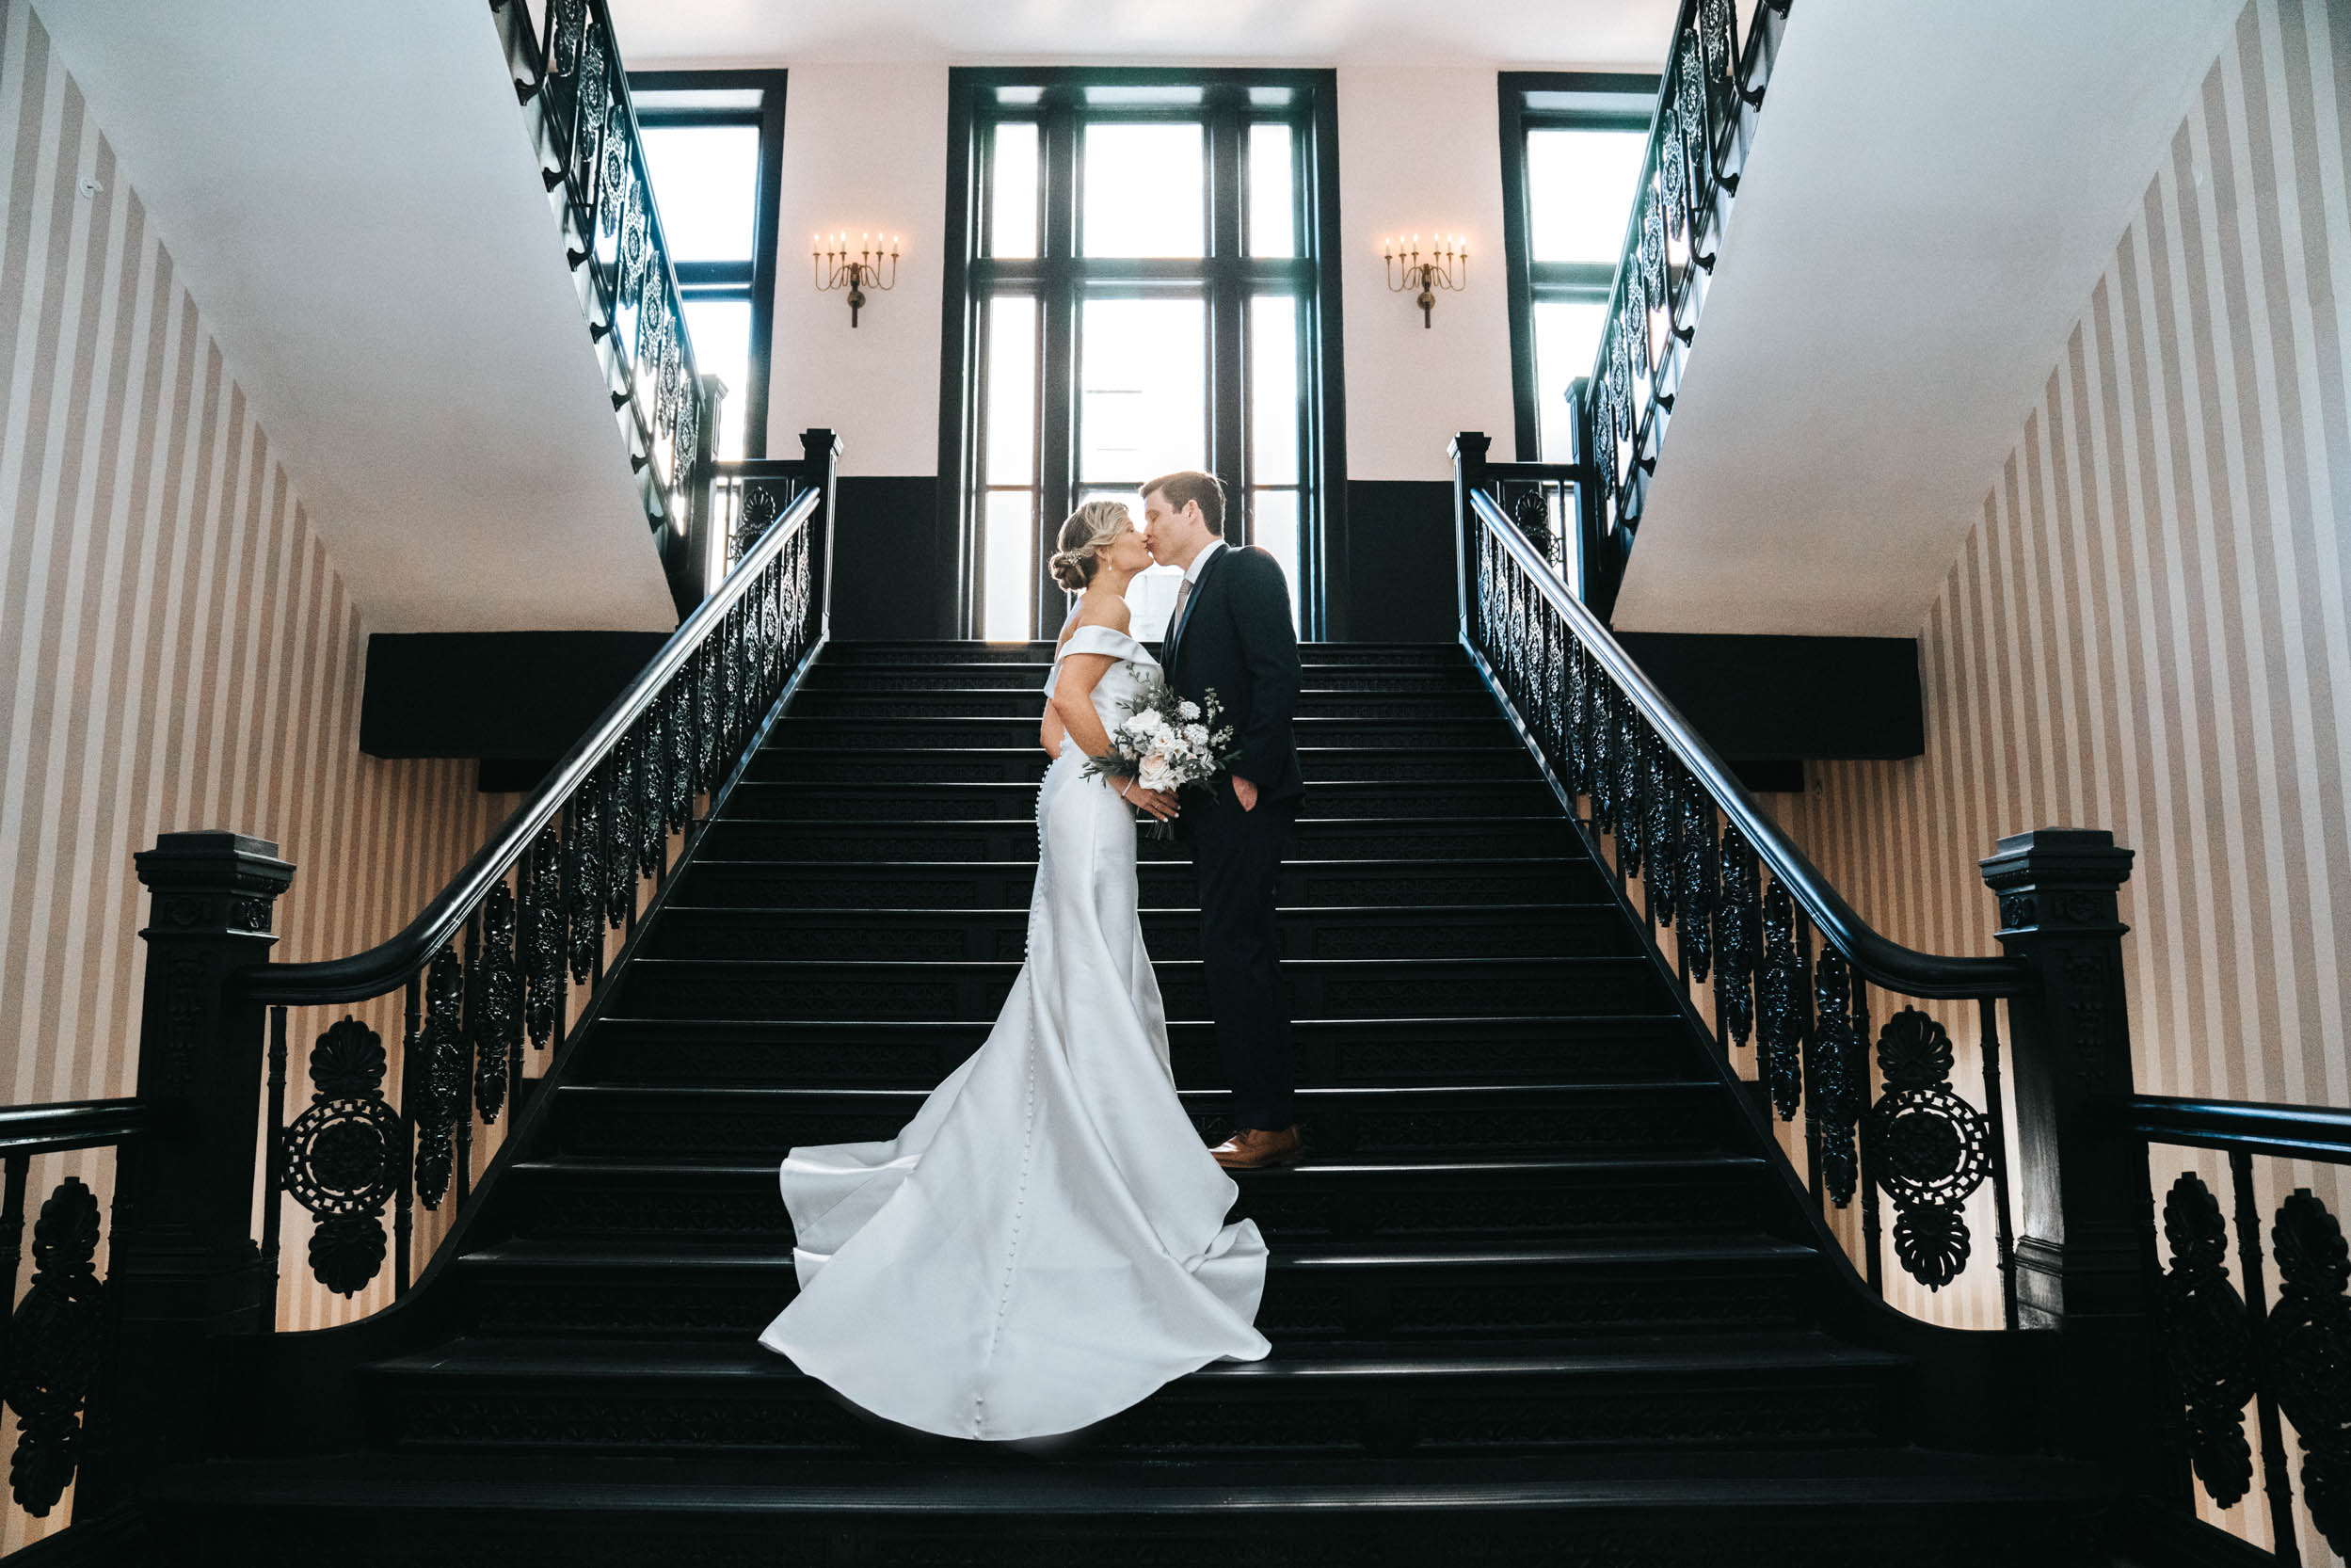 Bride and Groom kissing on antique staircase at the Maison De La Luz Hotel in New Orleans